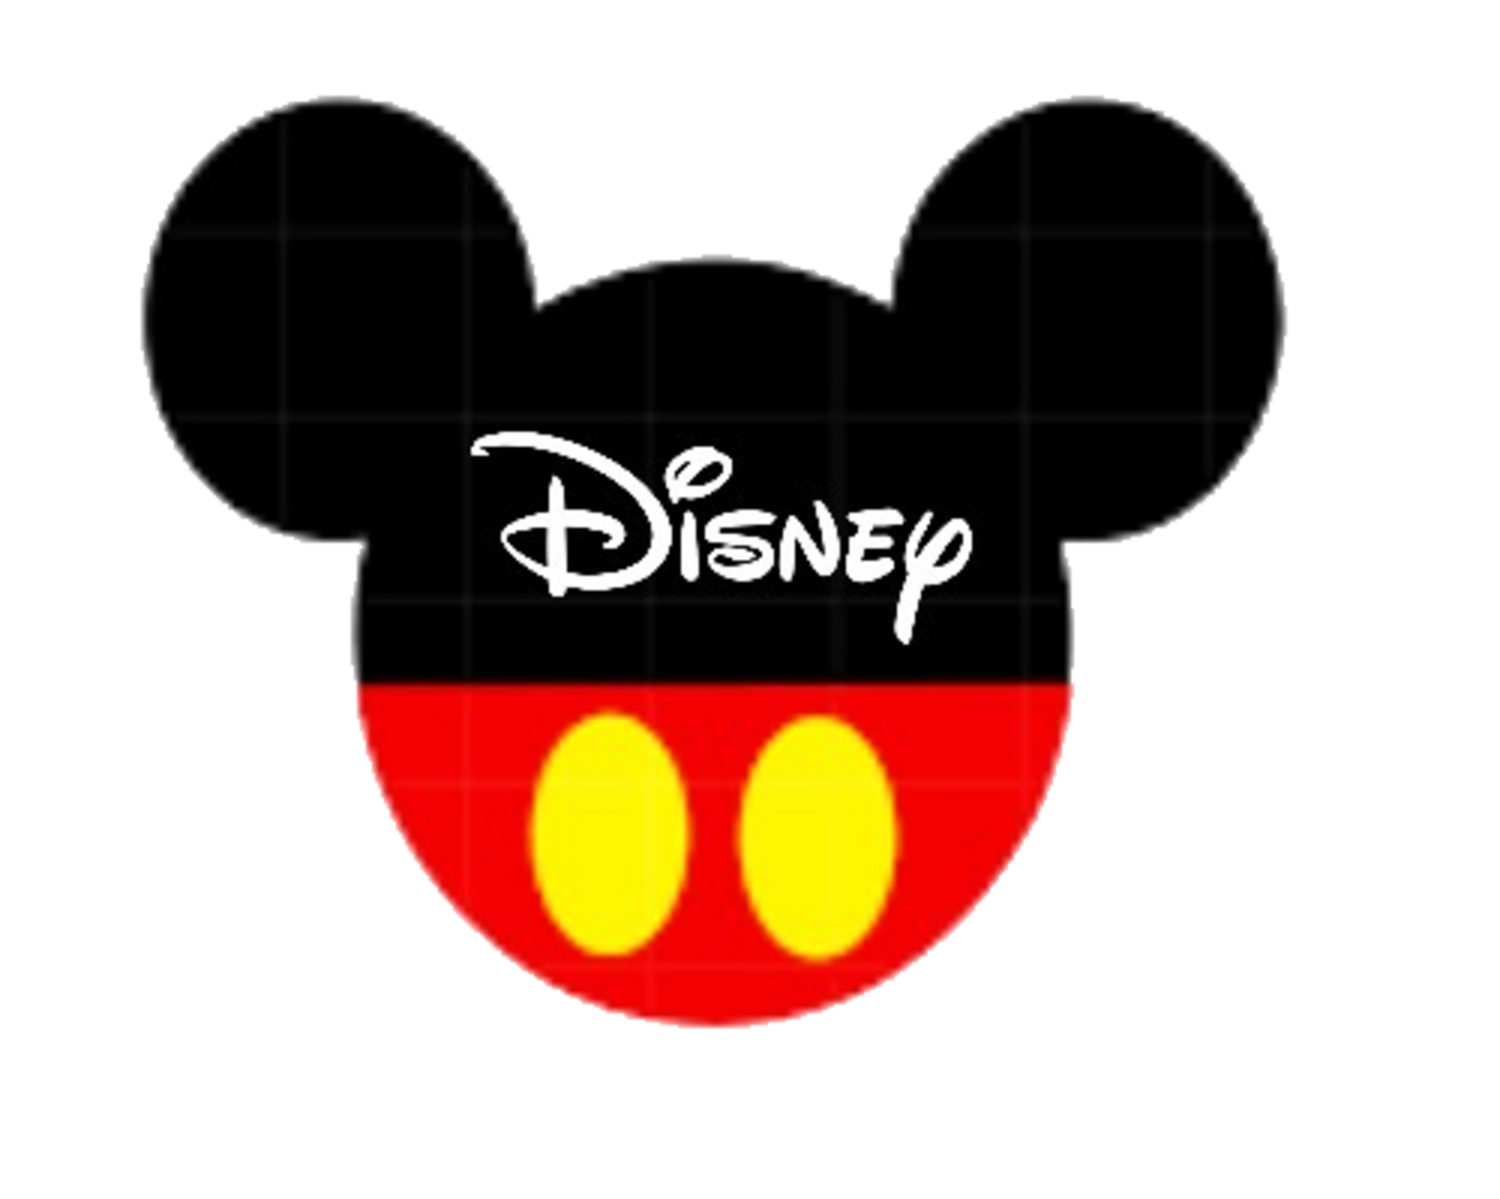 High Quality Mickey mouse logo orejas con calzones Blank Meme Template